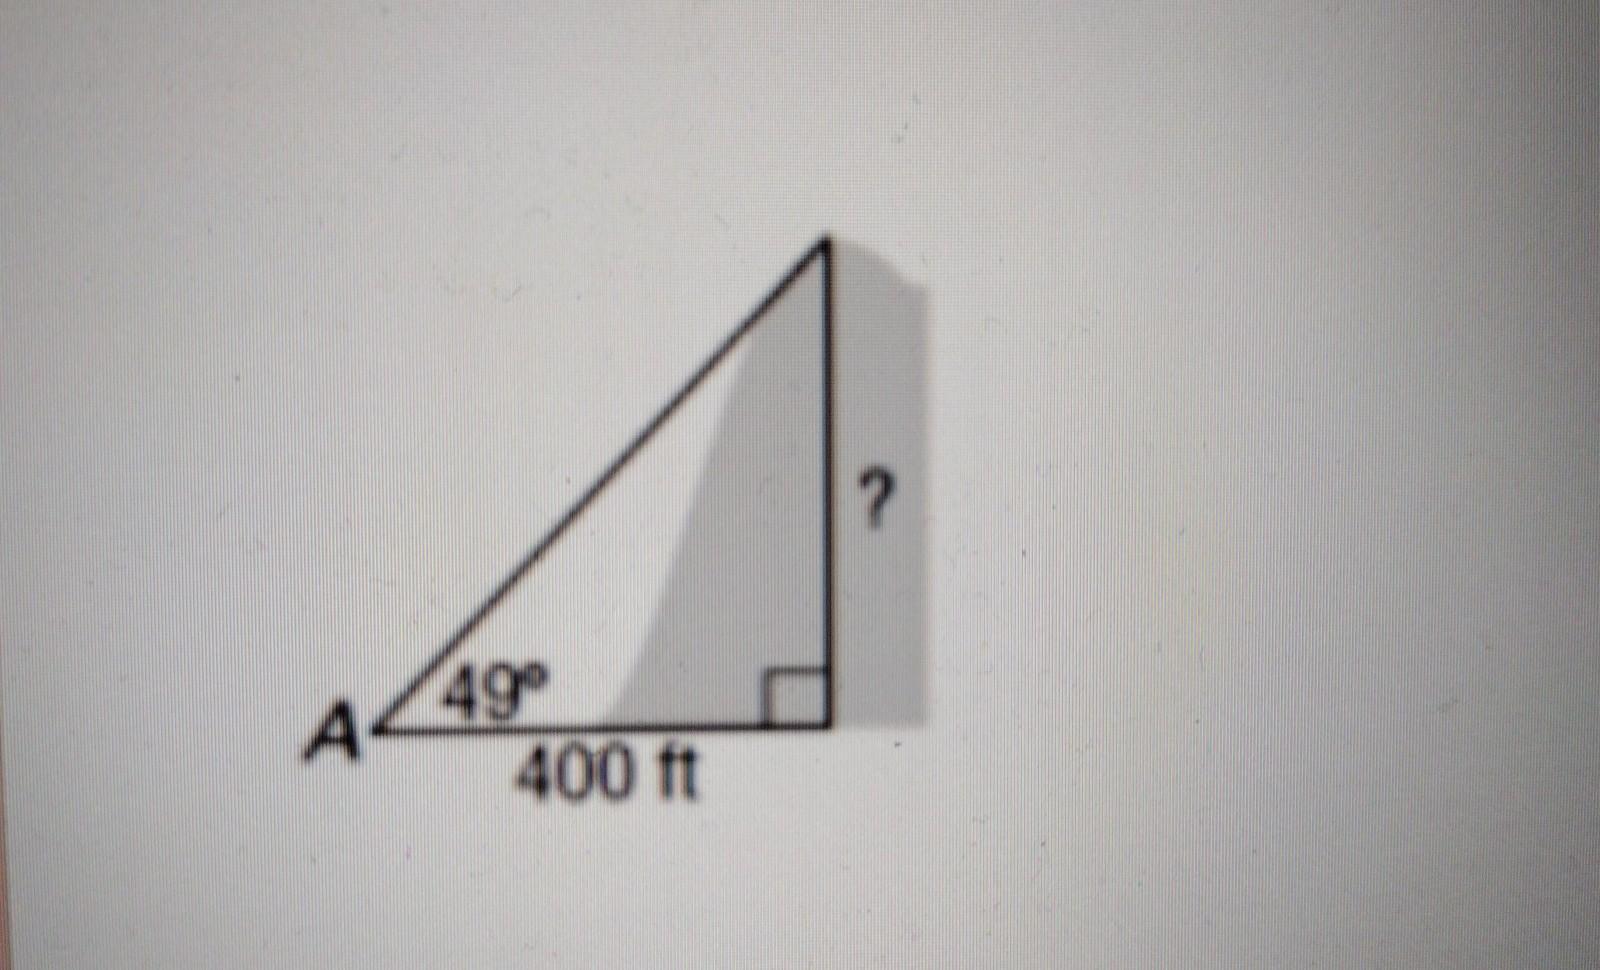 The Angle Of Elevation From Point A To The Top Of A Hill Is 49. If Point A Is 400 Feet From The Base